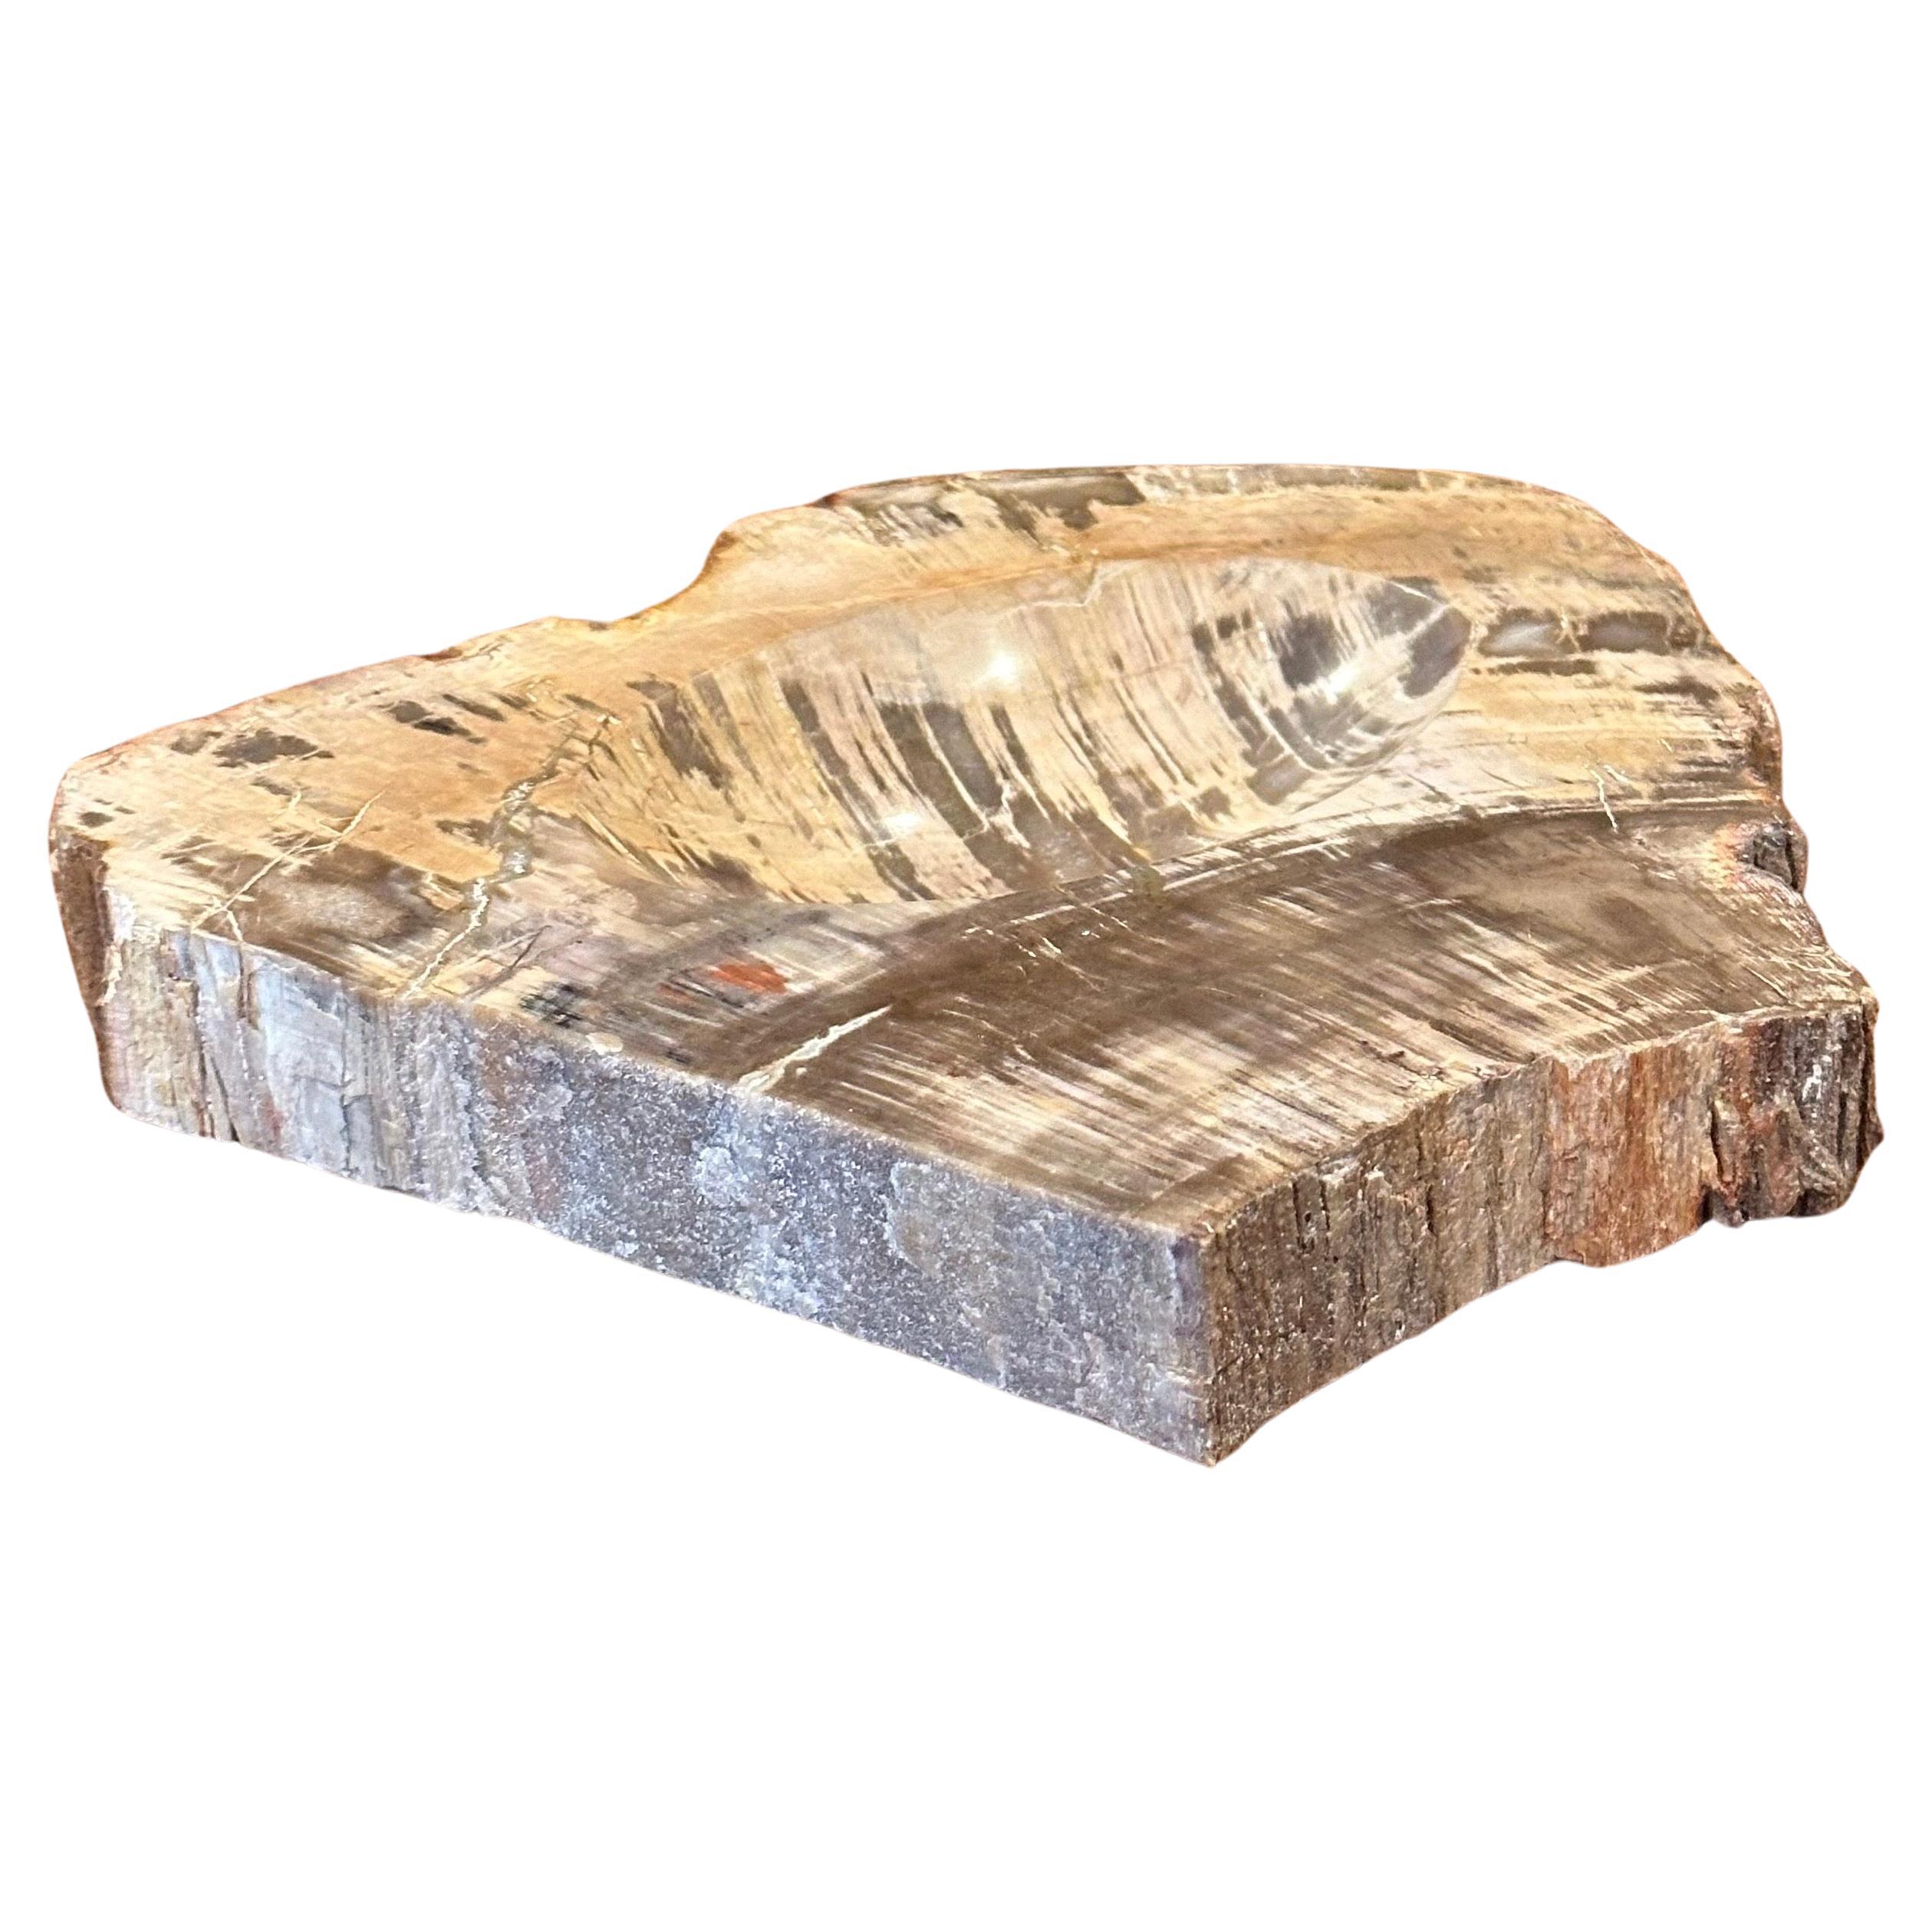 A very nice vintage petrified wood catch all / bowl, circa 1970s. The piece is in very good condition with wonderful brown and tan colors and measures 7